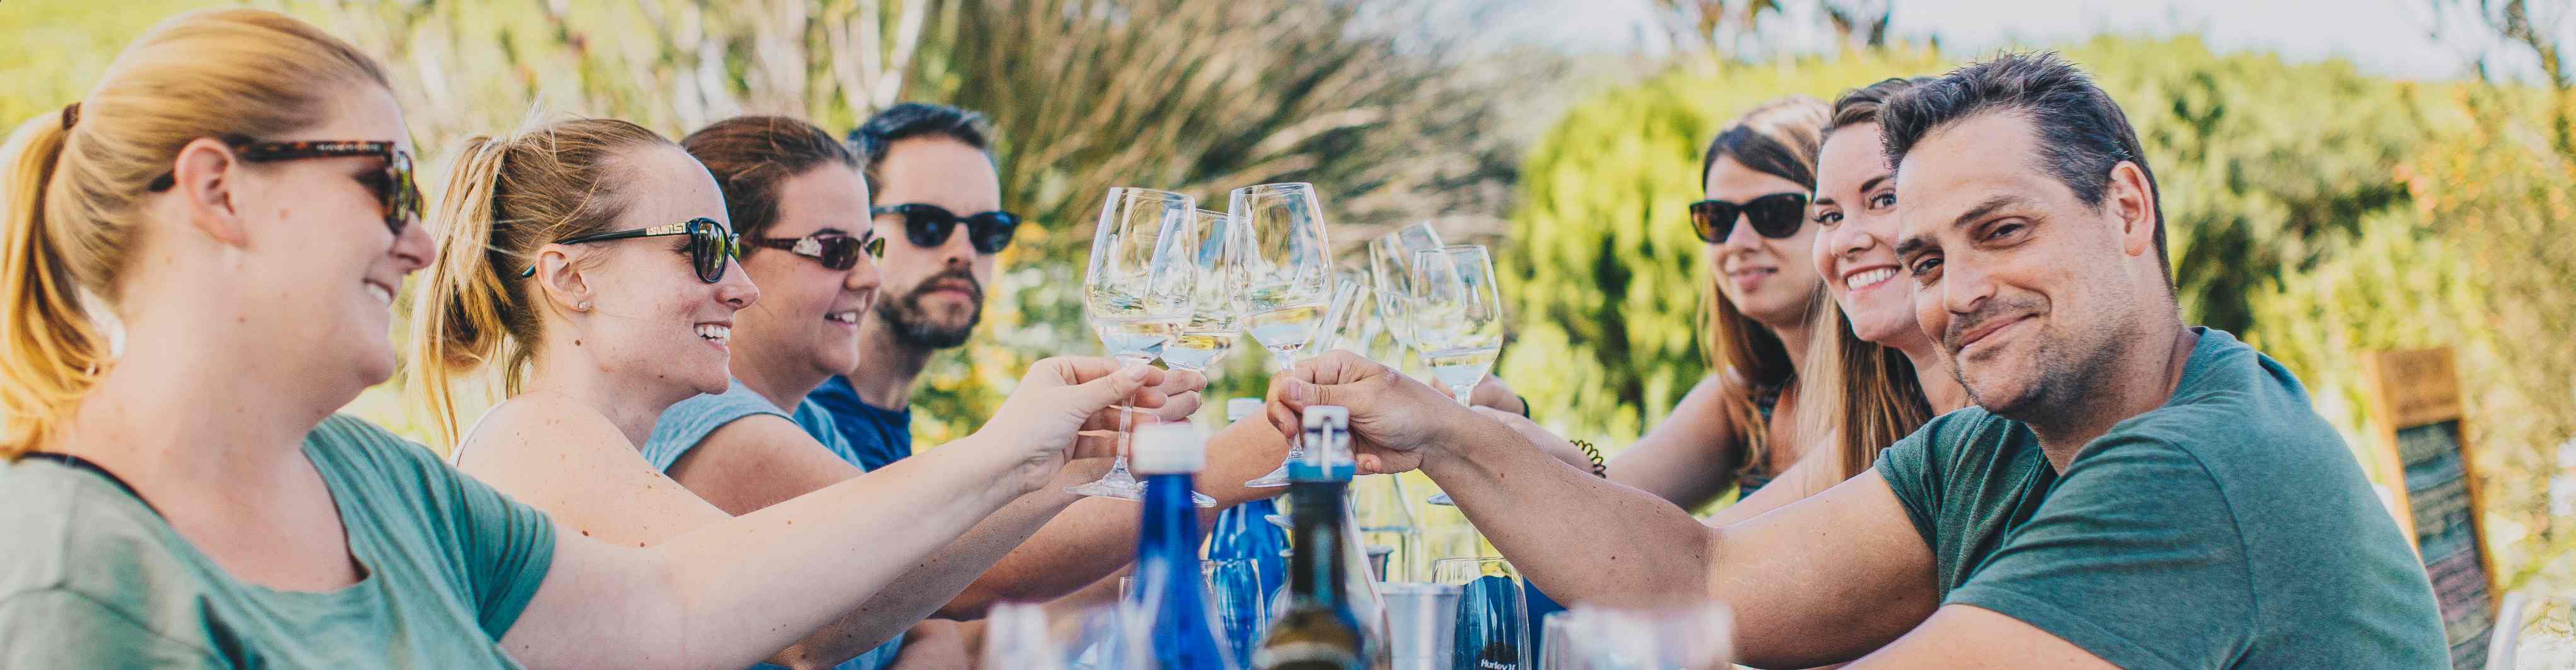 A group clinks wine glasses at one of South Africa's many wineries